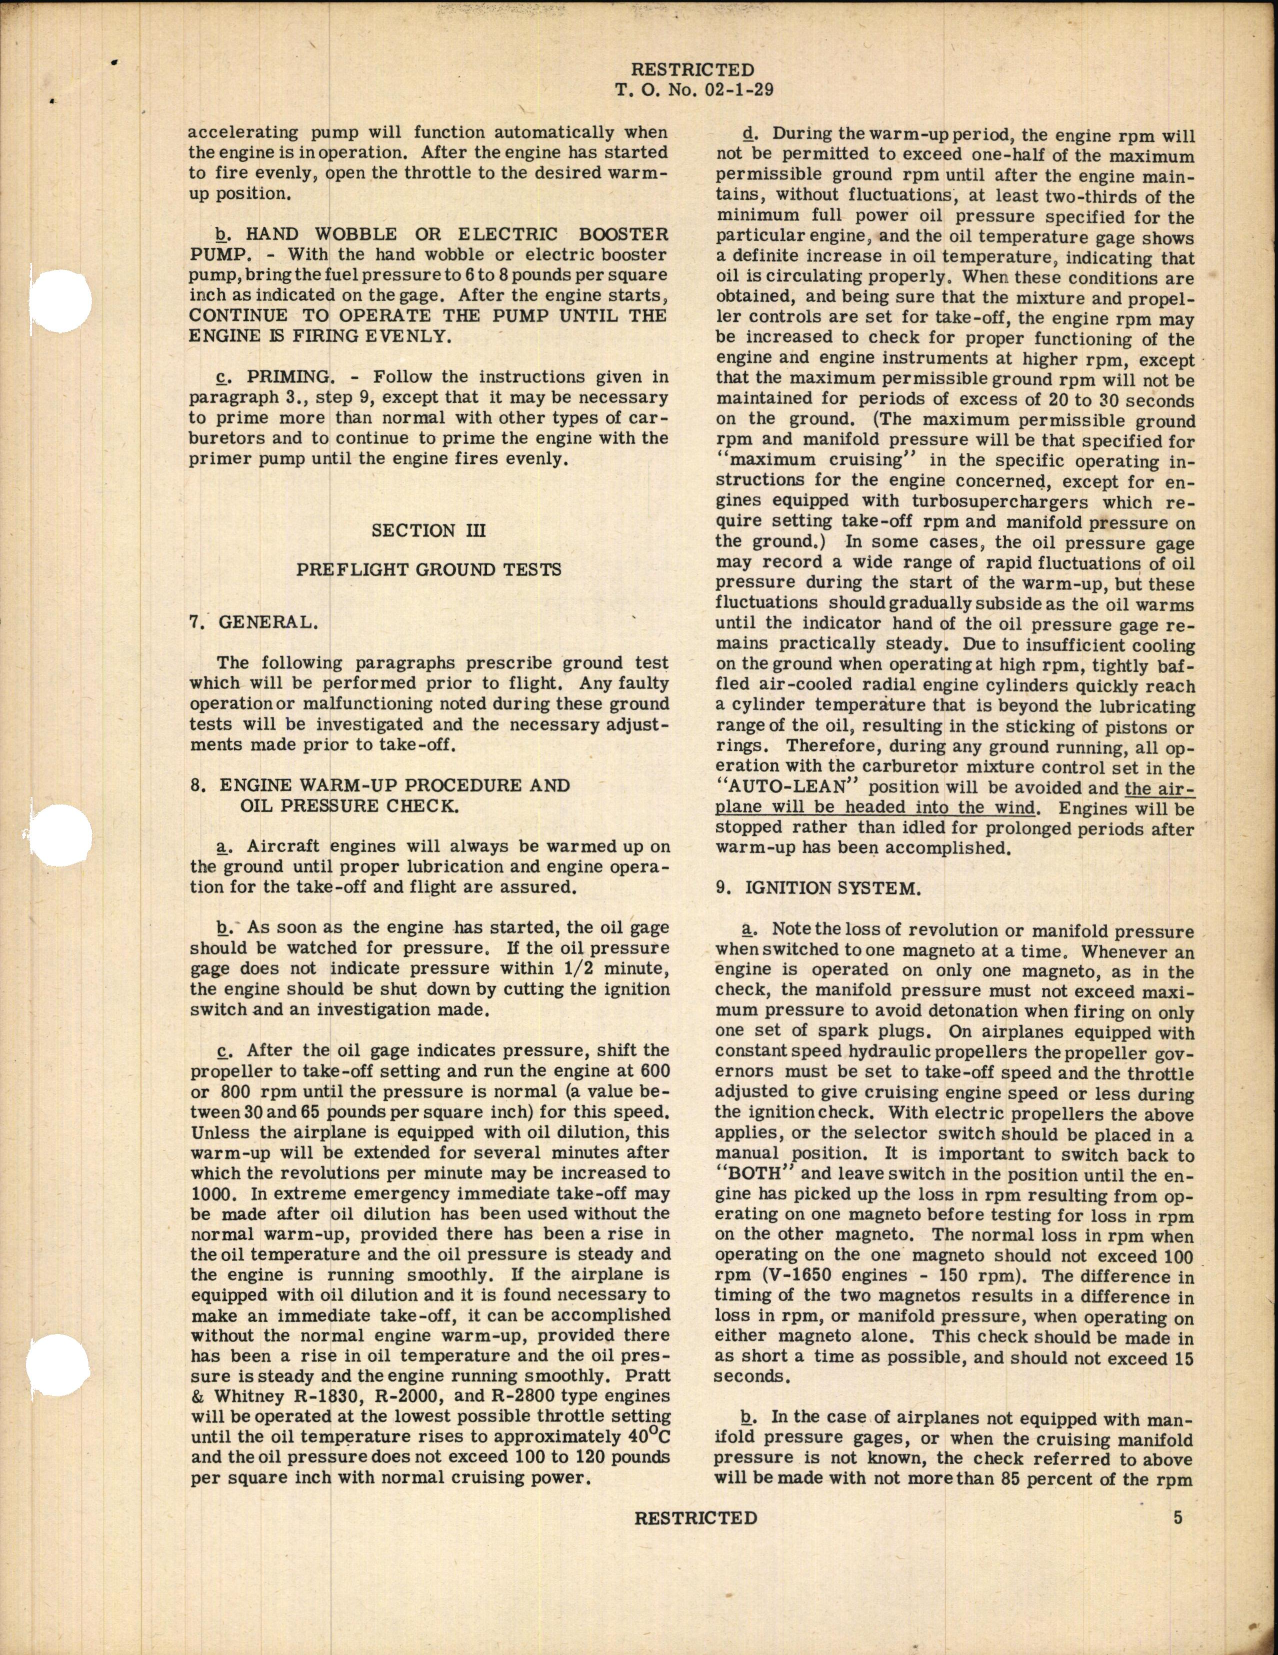 Sample page 5 from AirCorps Library document: Ground Operation Instructions for Aircraft Engines